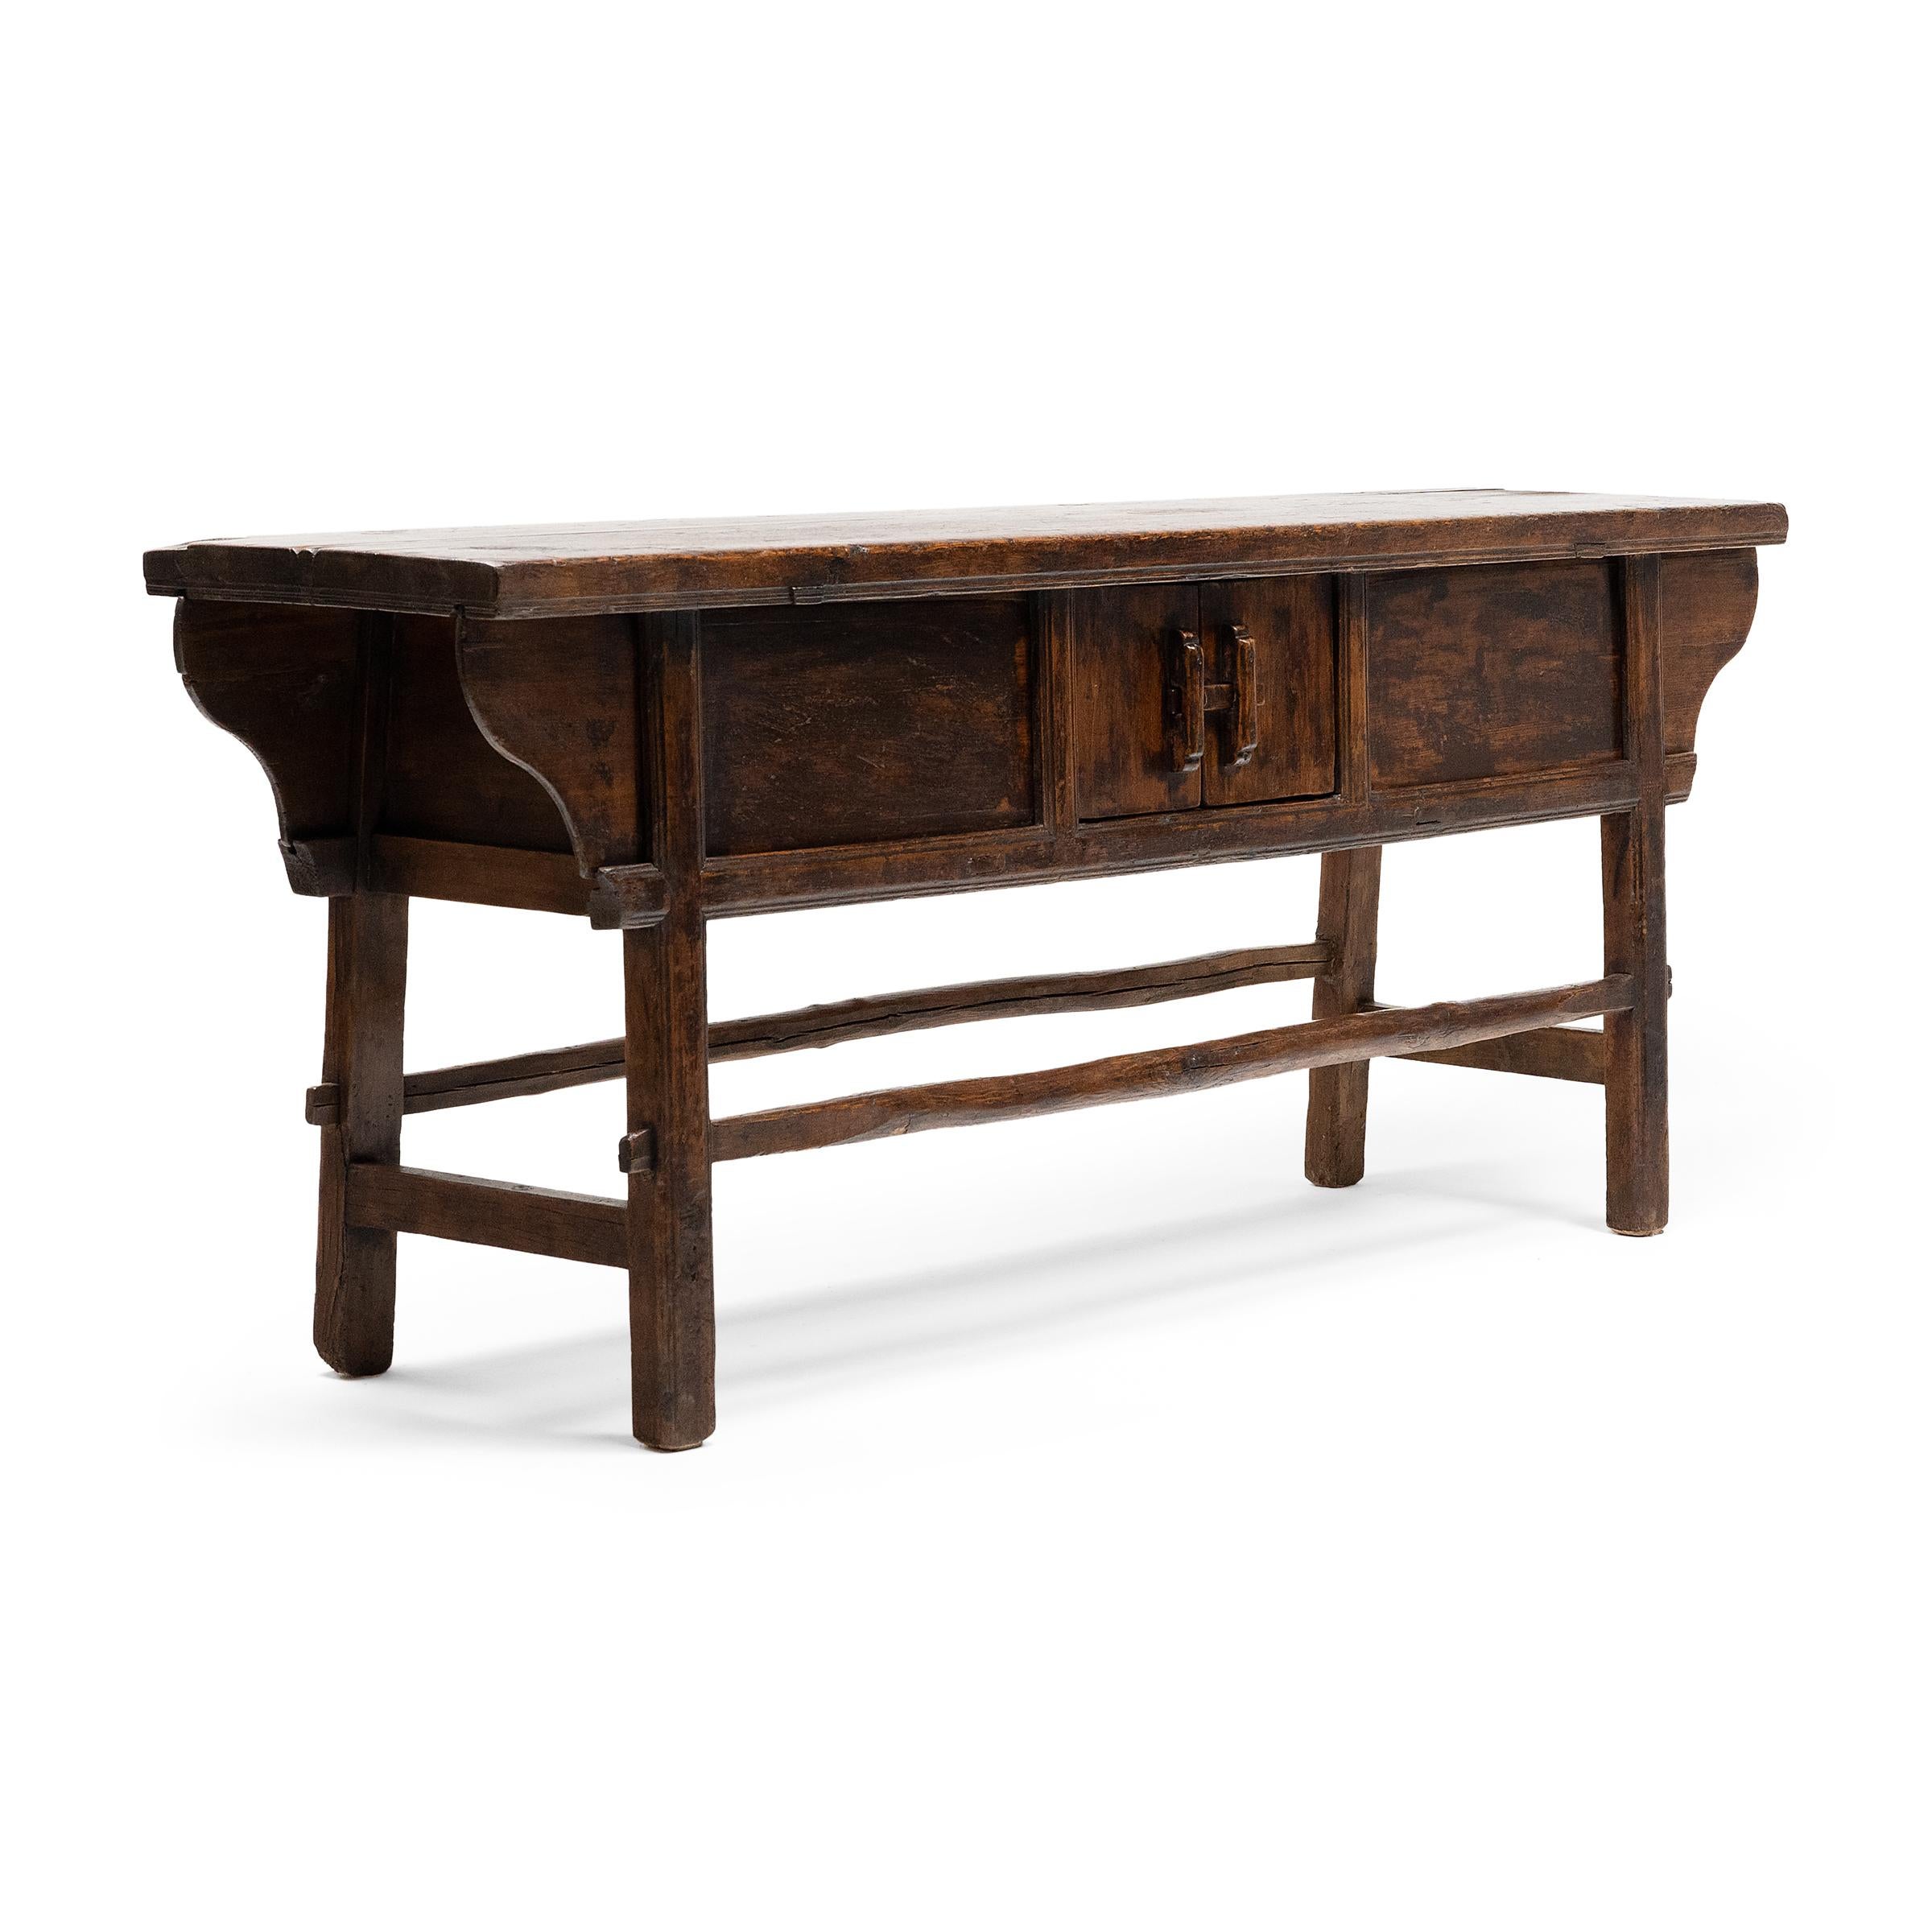 Qing Provincial Chinese Dongbei Sideboard, c. 1900 For Sale